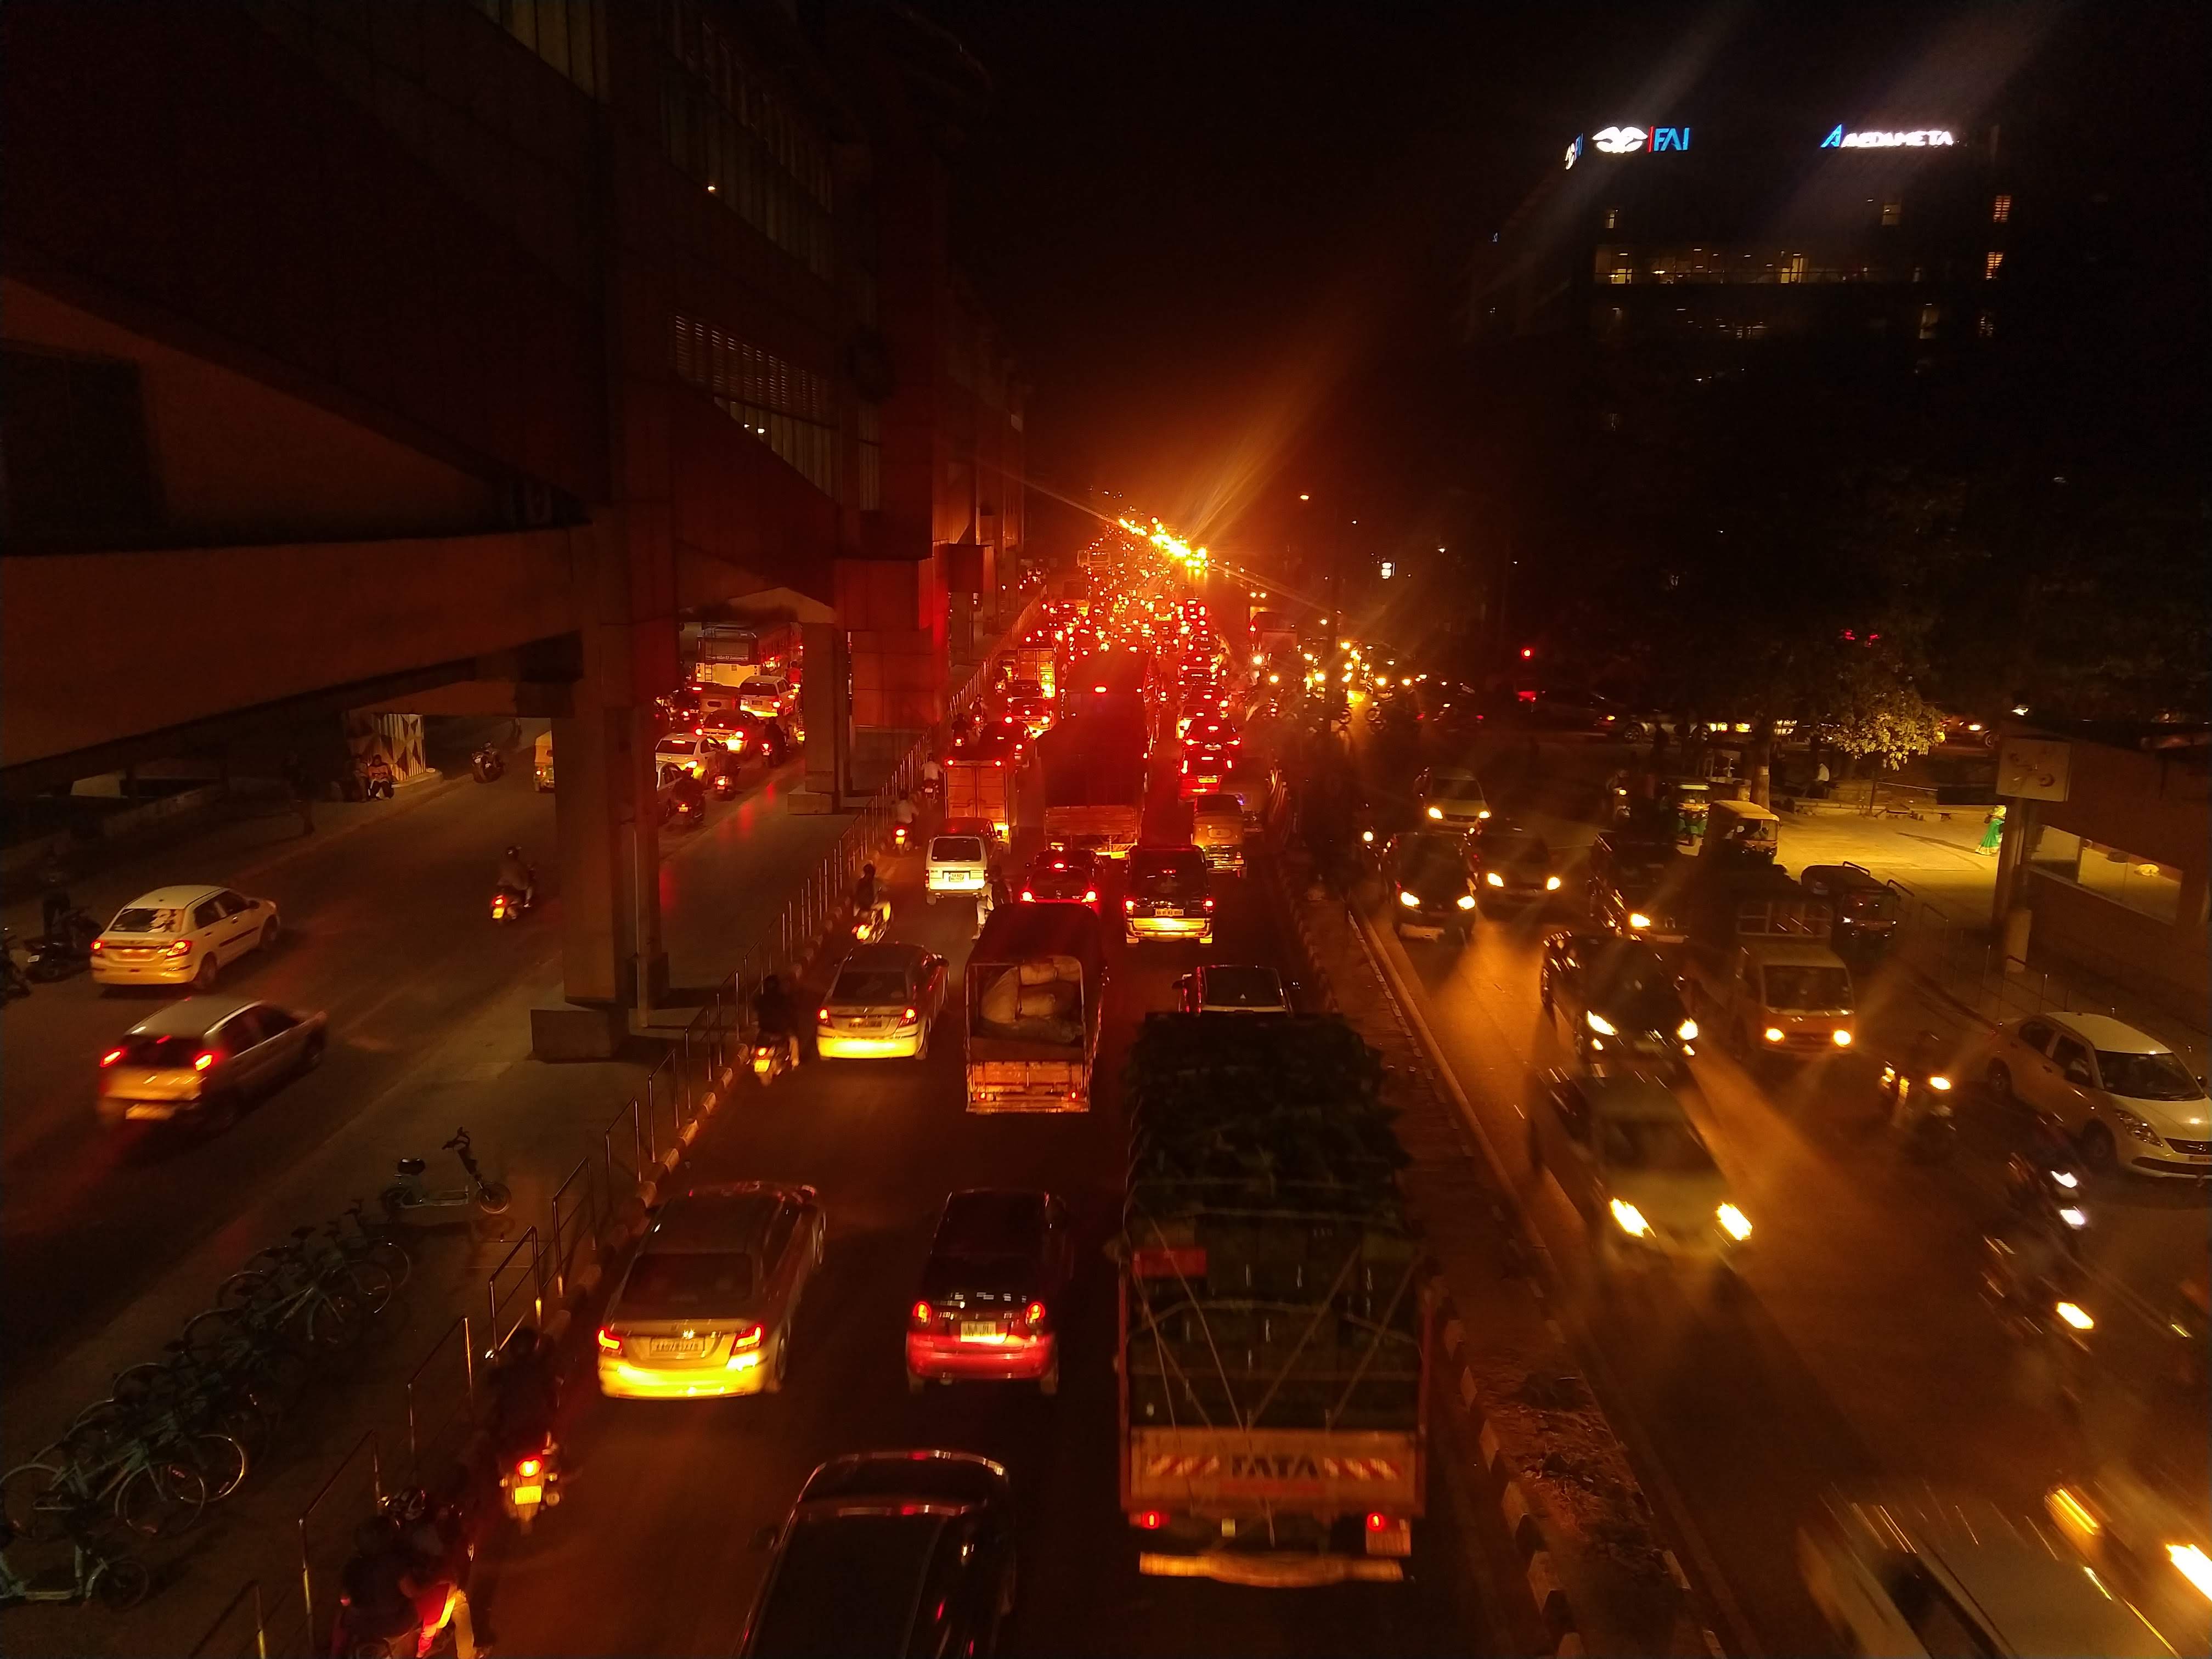 Private Vehicles Choke City Streets, Highlighting the Need for Efficient Public Transit Solutions - A Scene from Bangalore